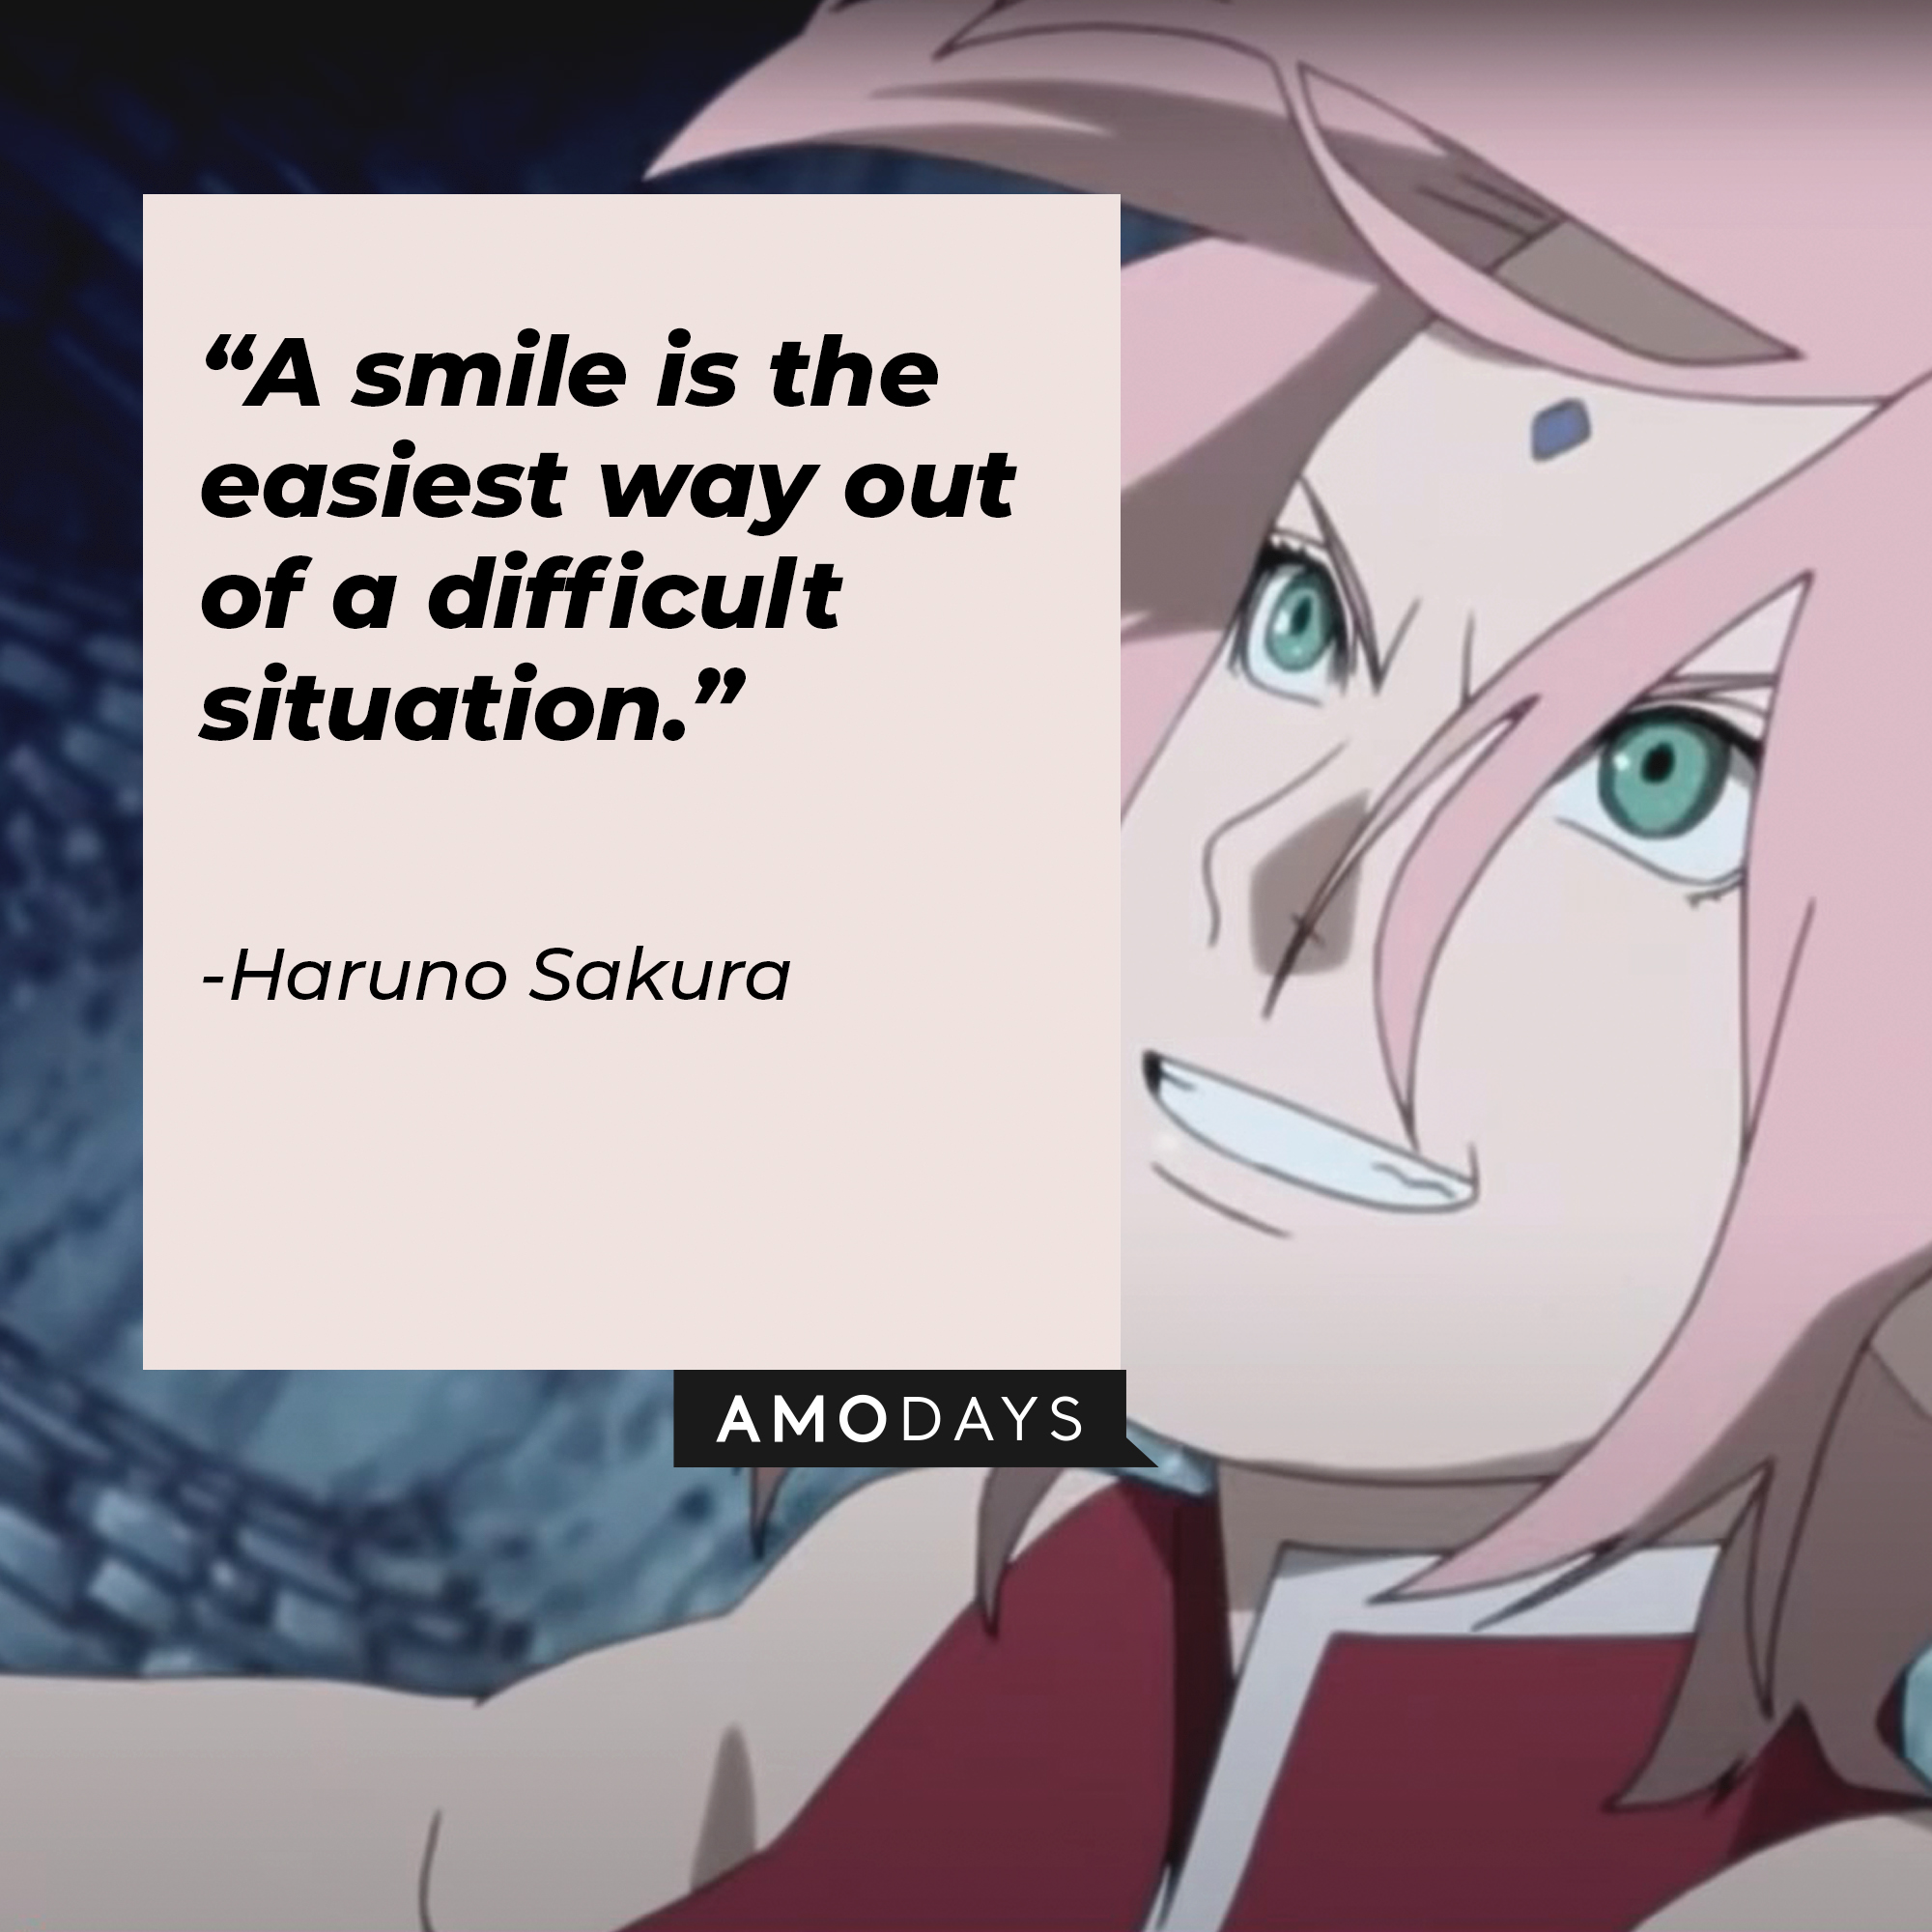 Haruno Sakura’s quote: “A smile is the easiest way out of a difficult situation.” | Source: facebook.com/narutoofficialsns